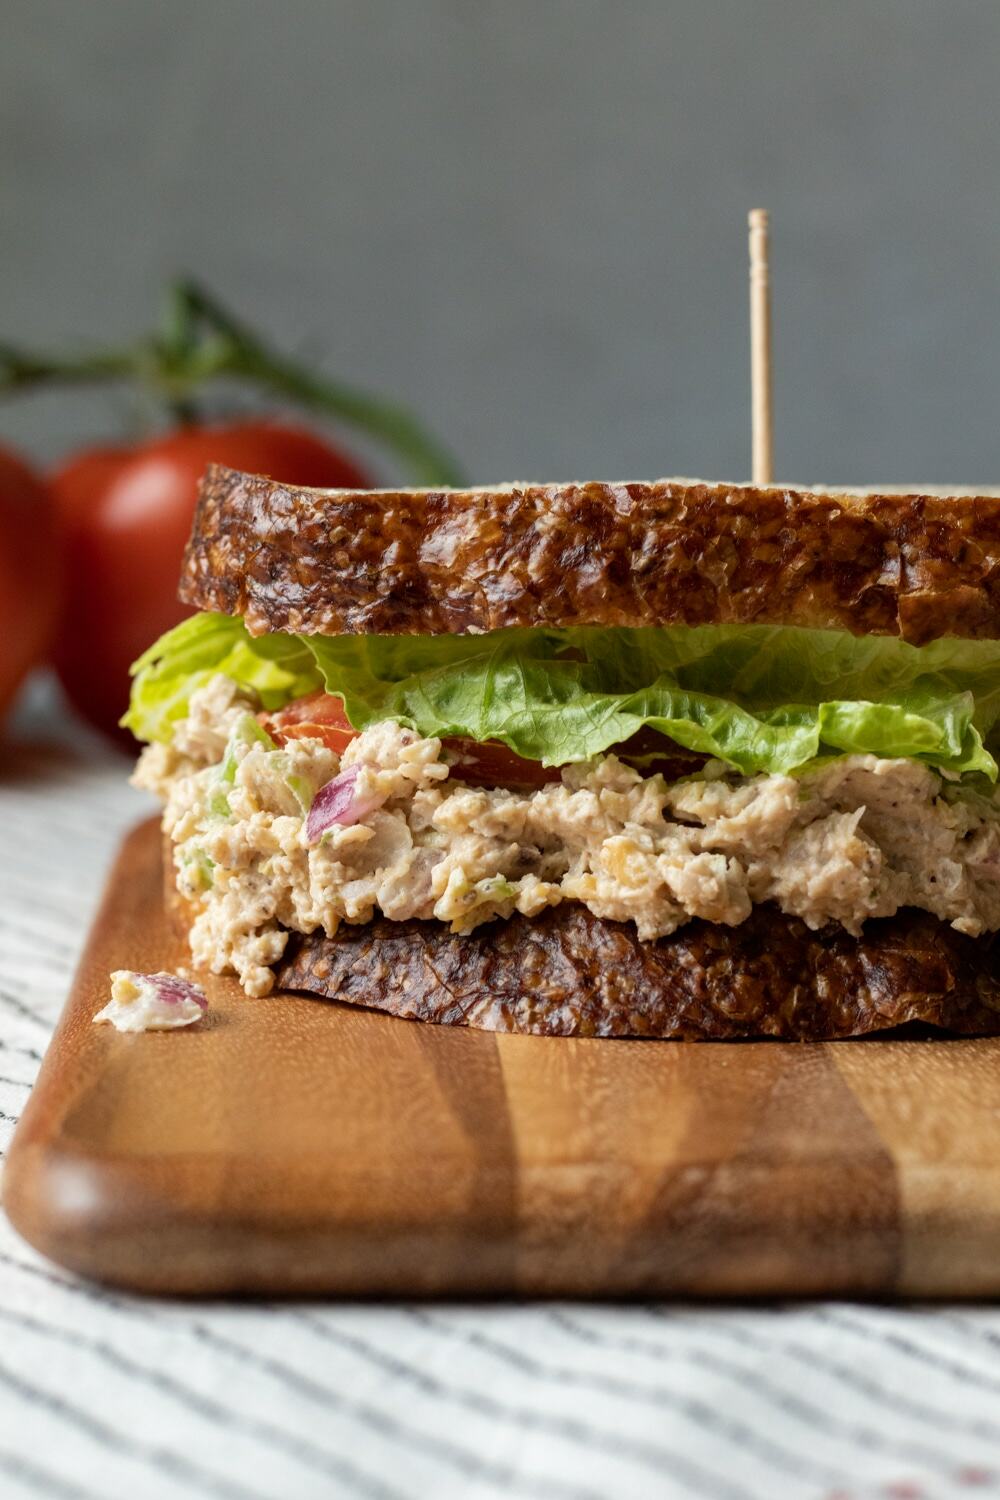 side view of vegan tuna salad sandwich, with chickpeas and jackfruit, red onion, celery.